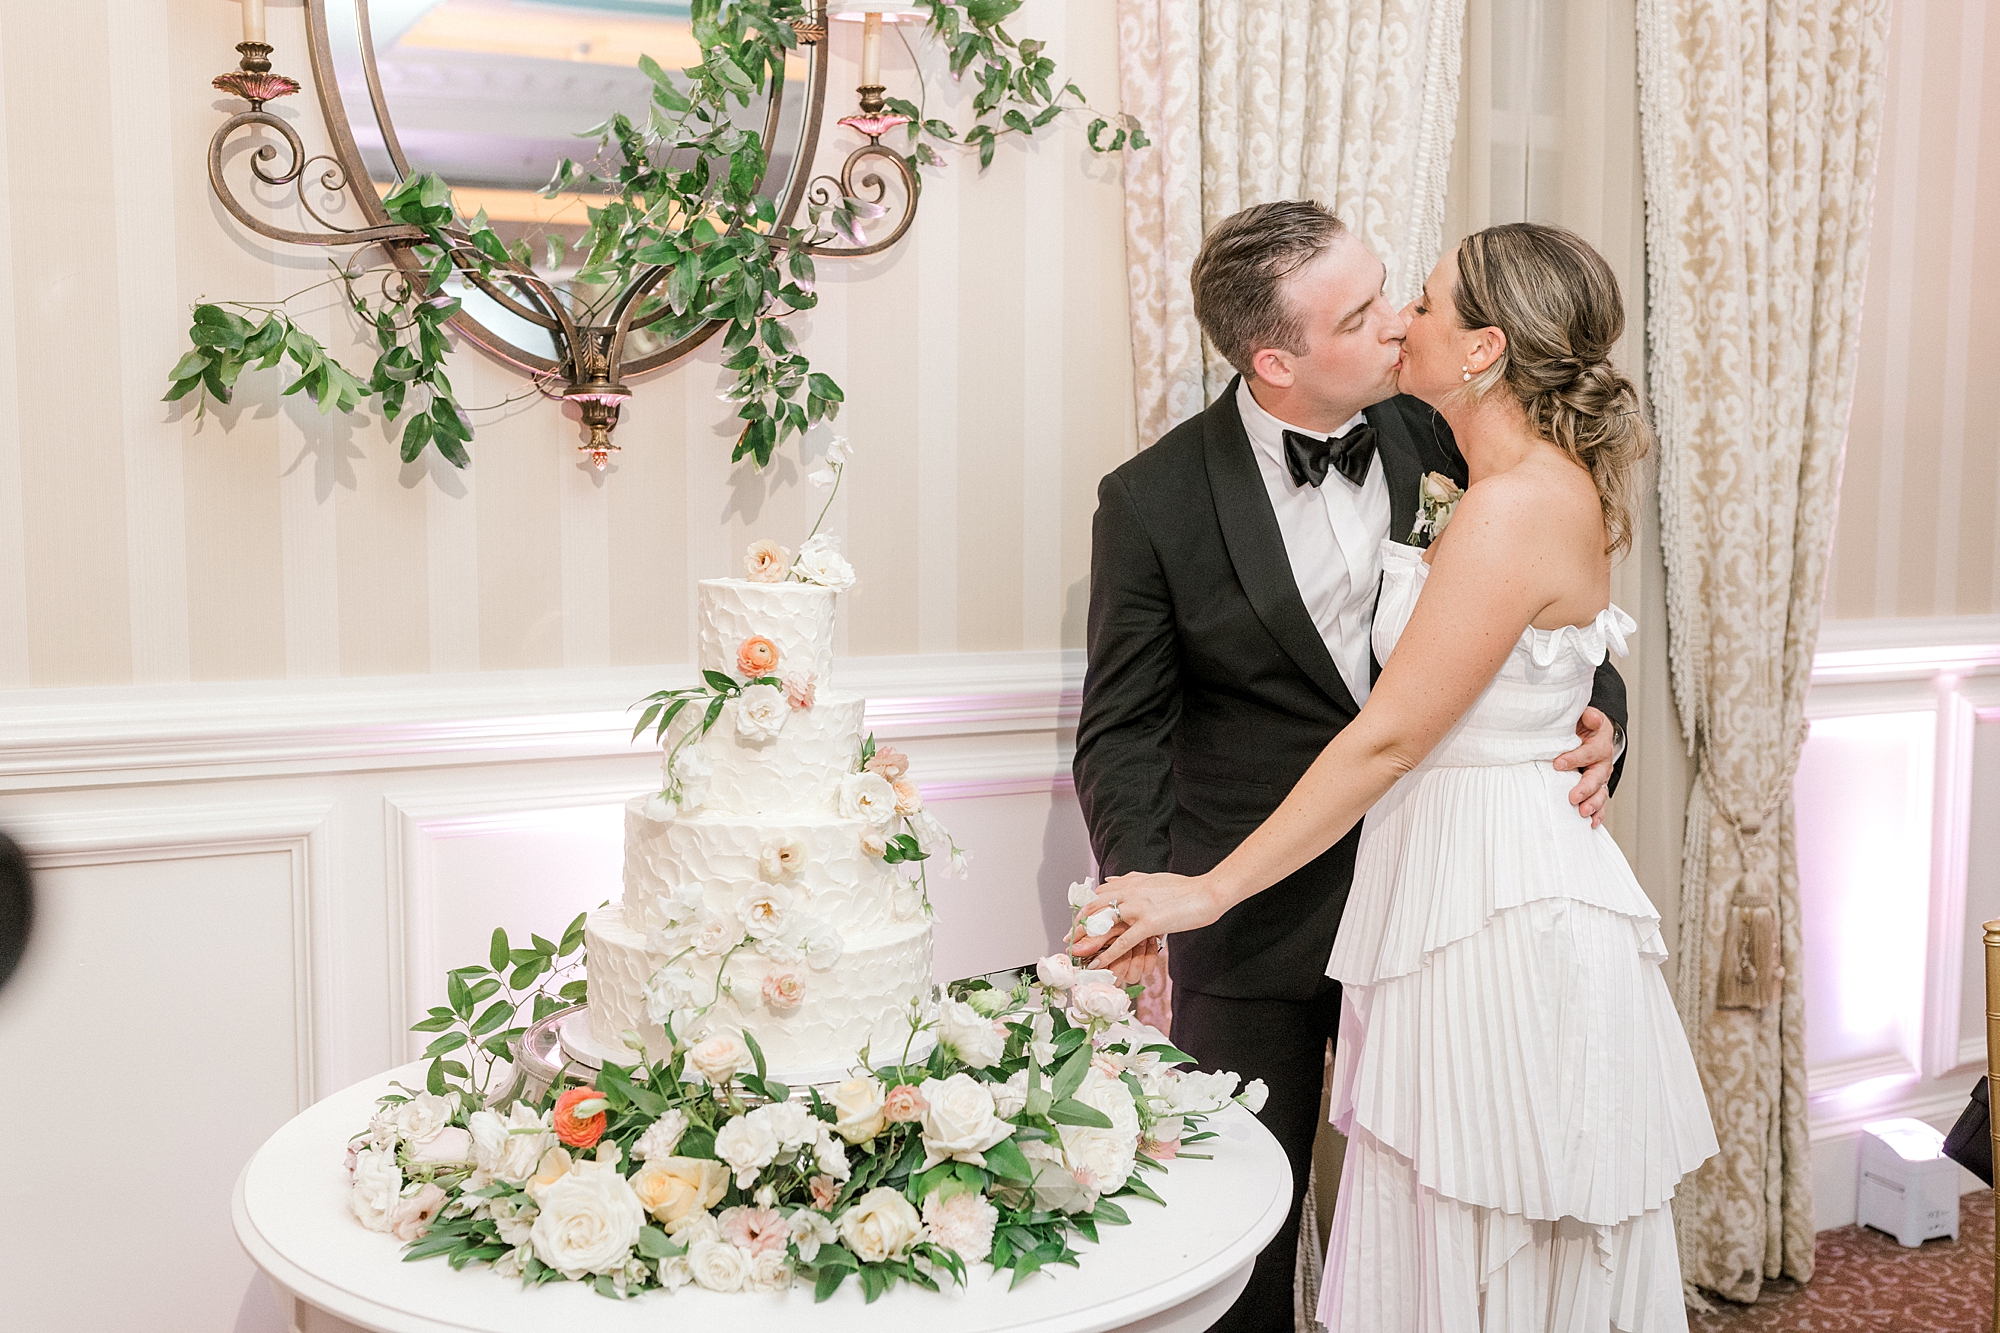 bride and groom kiss during cake cutting at Long Beach Island wedding reception